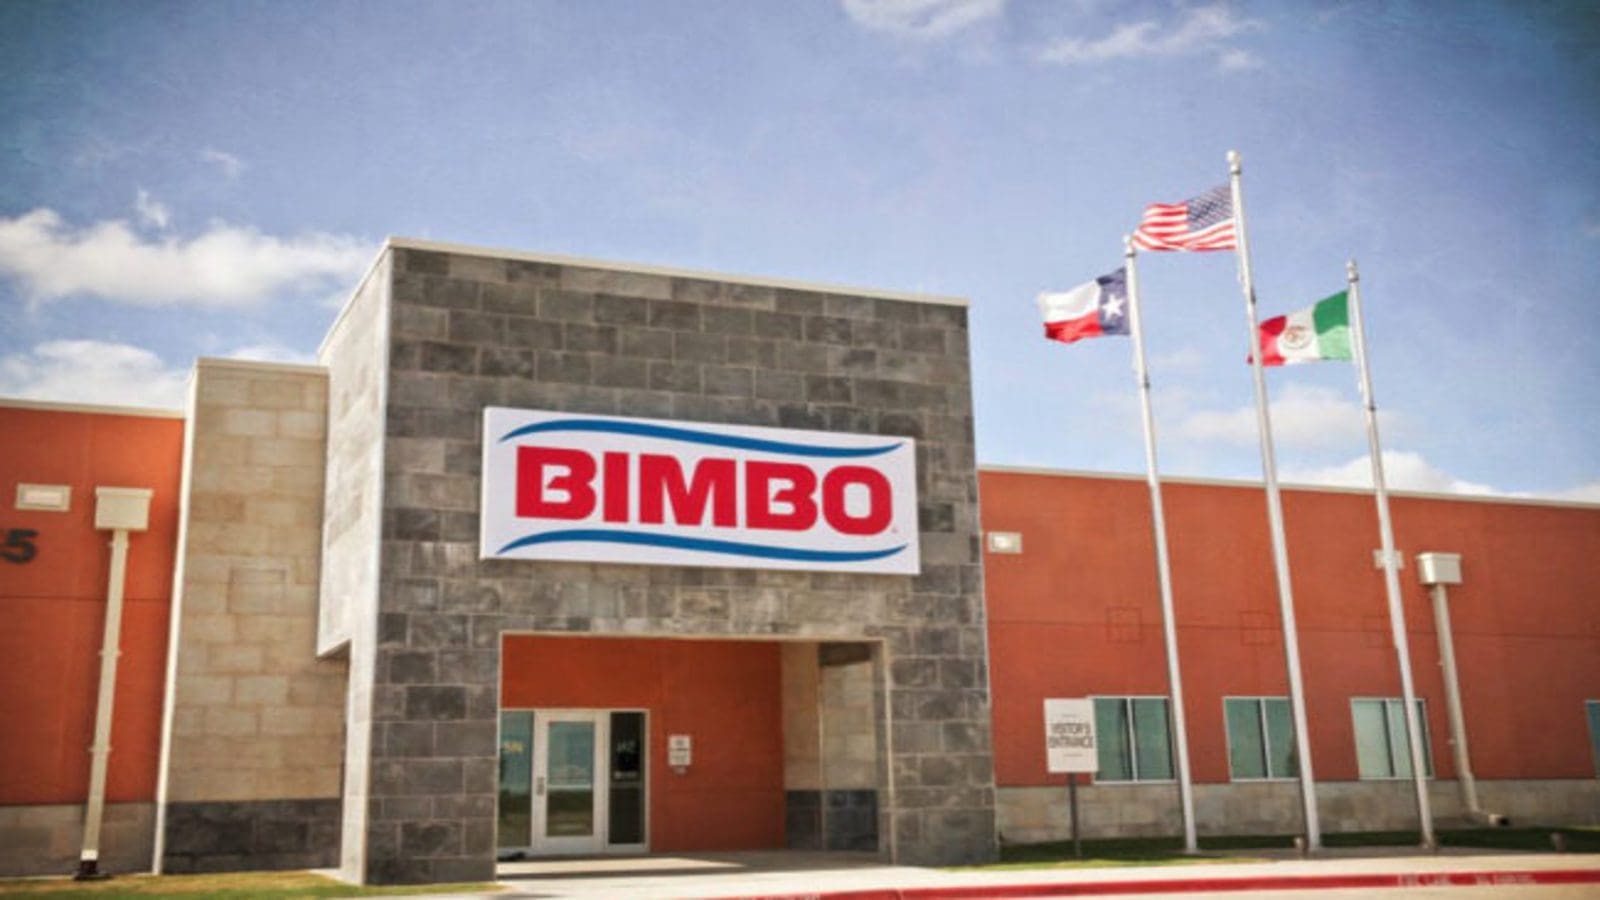 Grupo Bimbo shuts its confectionery division in Uruguay to focus on baking and snacking categories